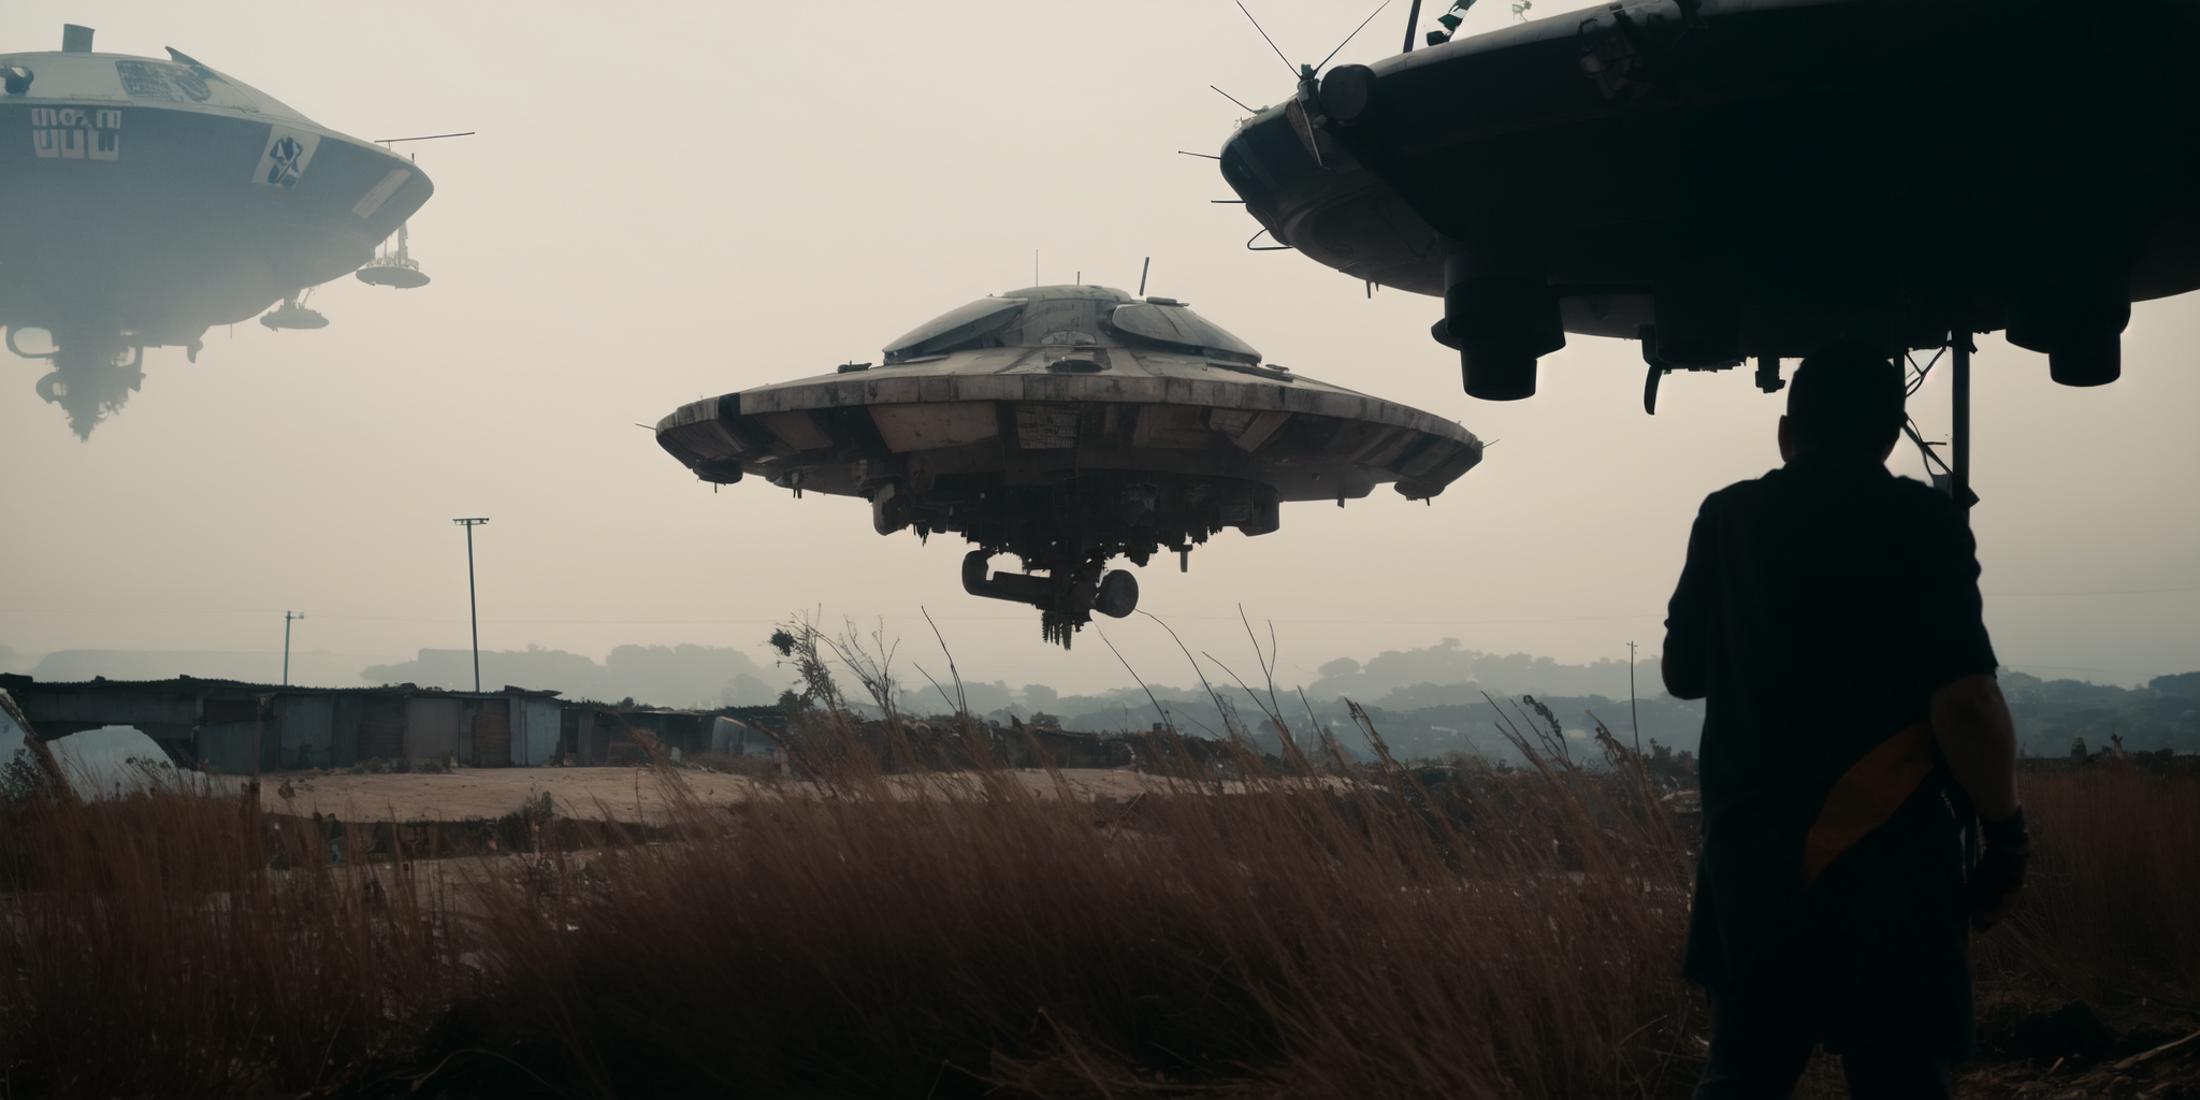 District 9 image by dhgo10